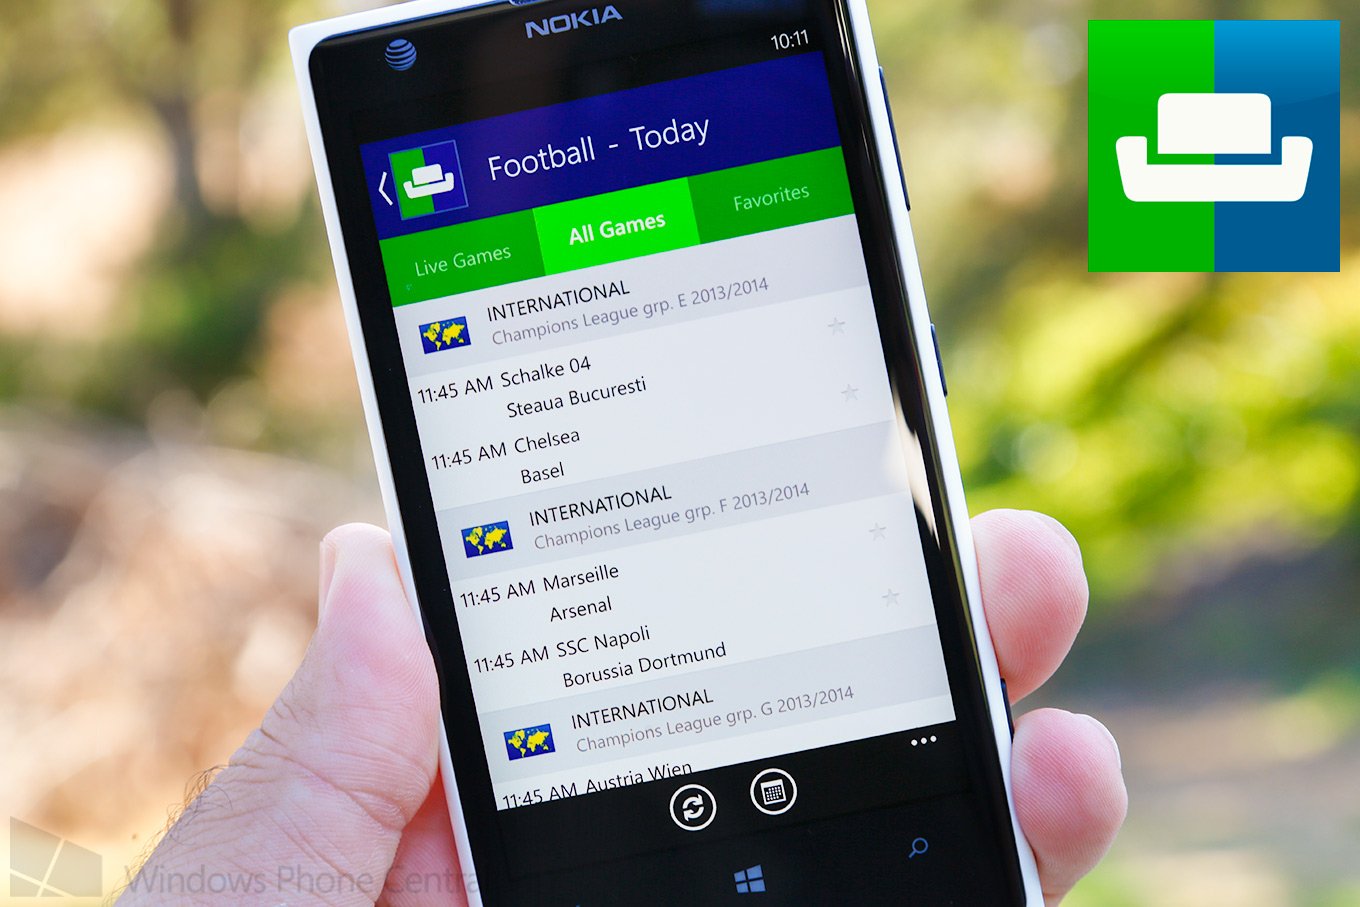 Sports fan? Then grab the updated SofaScore LiveScore app for Windows Phone Windows Central